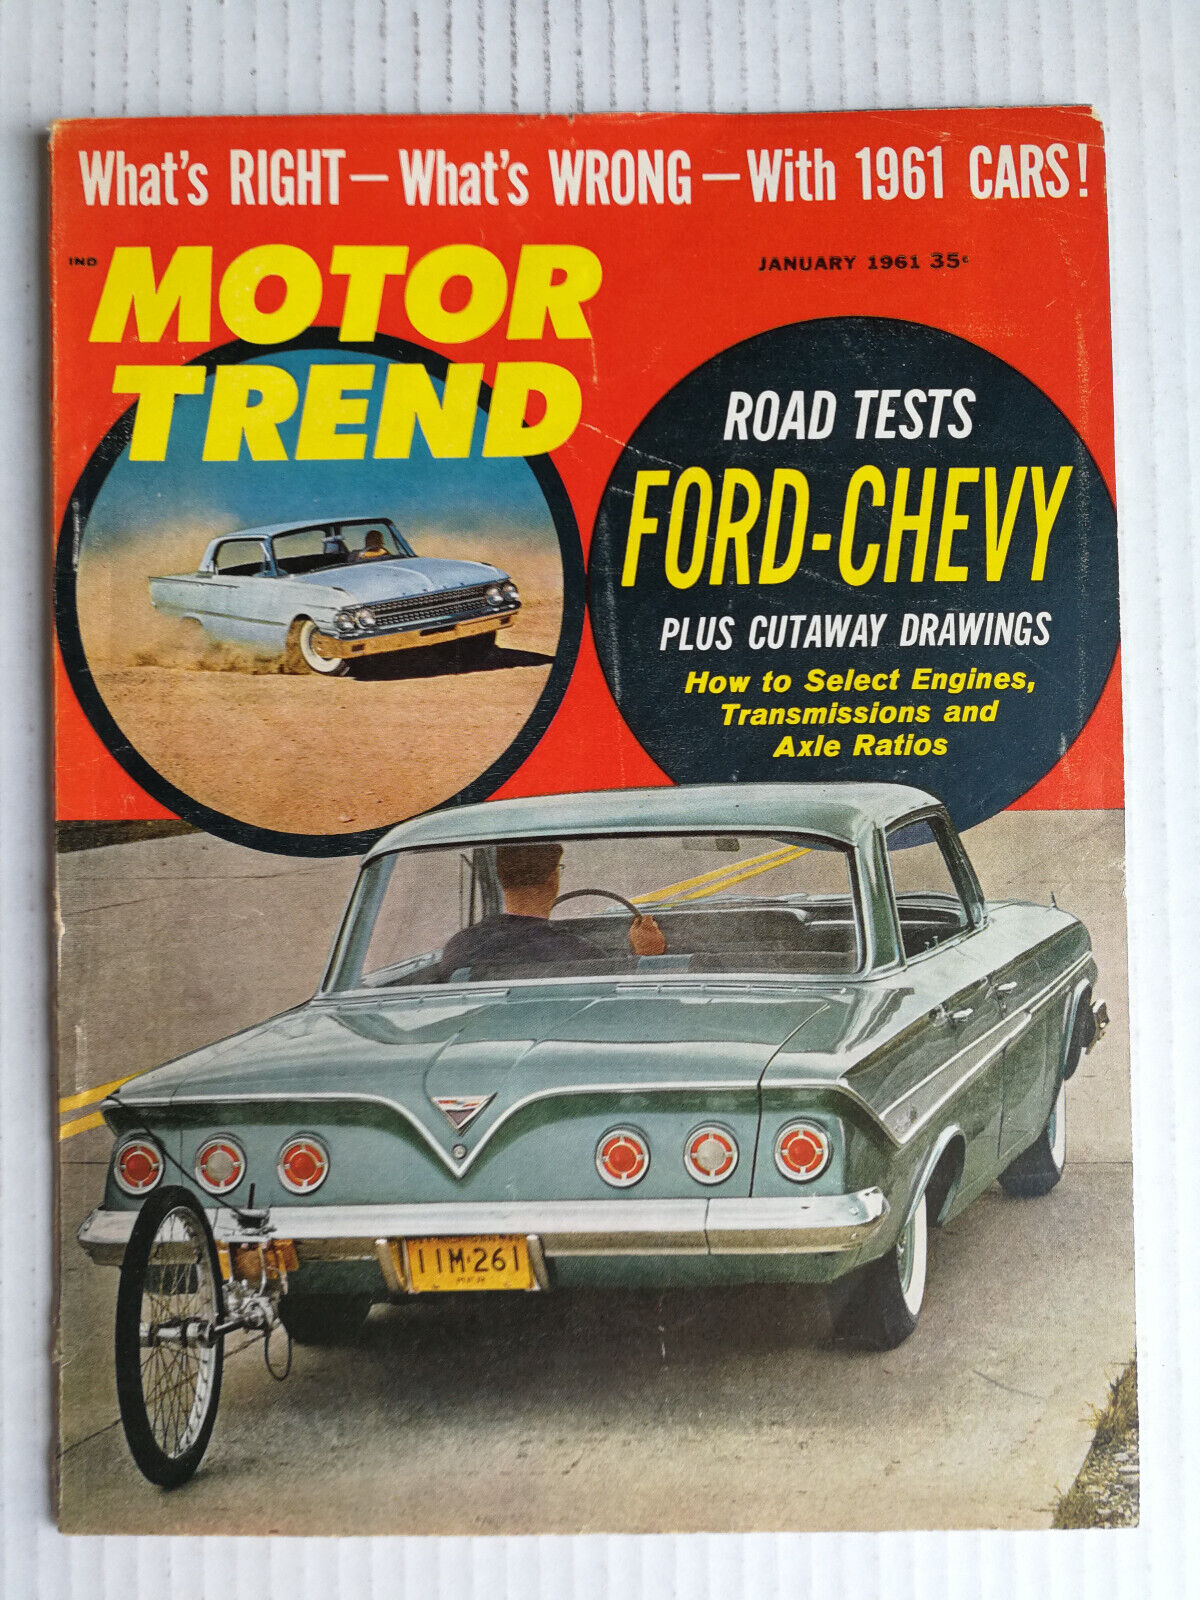 Motor Trend Magazine 1961 - The Complete Year - All 12 Issues